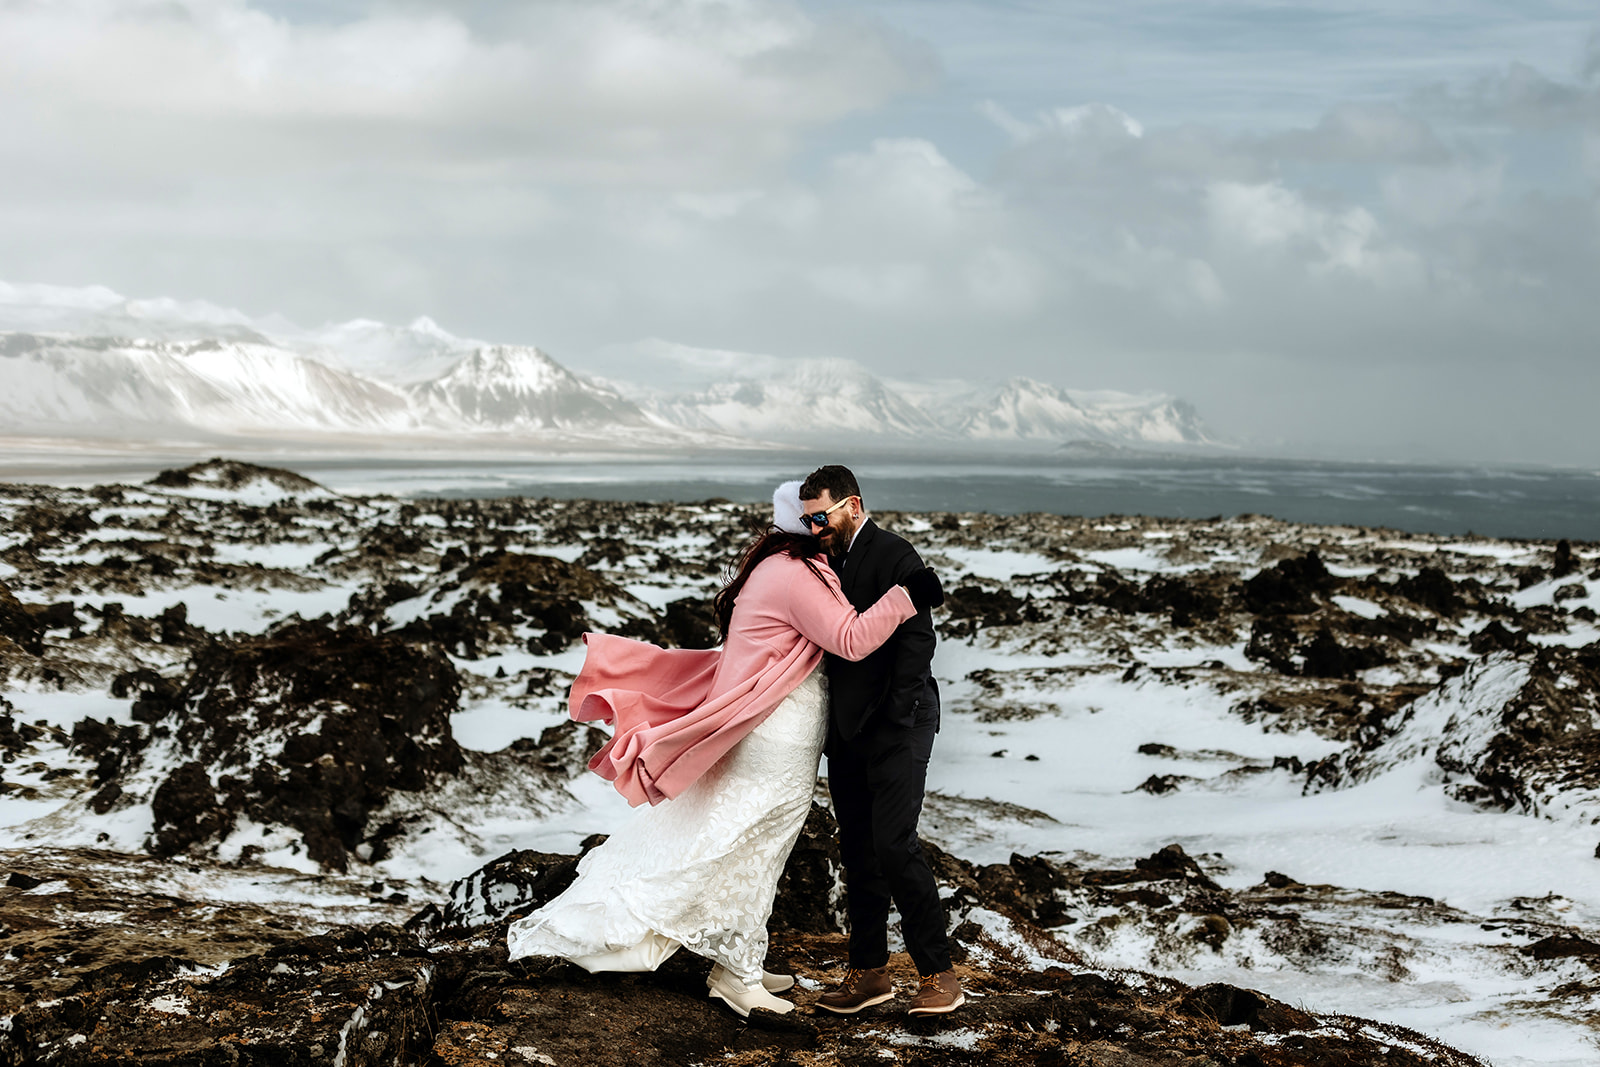 Married couple who got married in Iceland are standing on top of a mountain and surrounded by snow and mountains